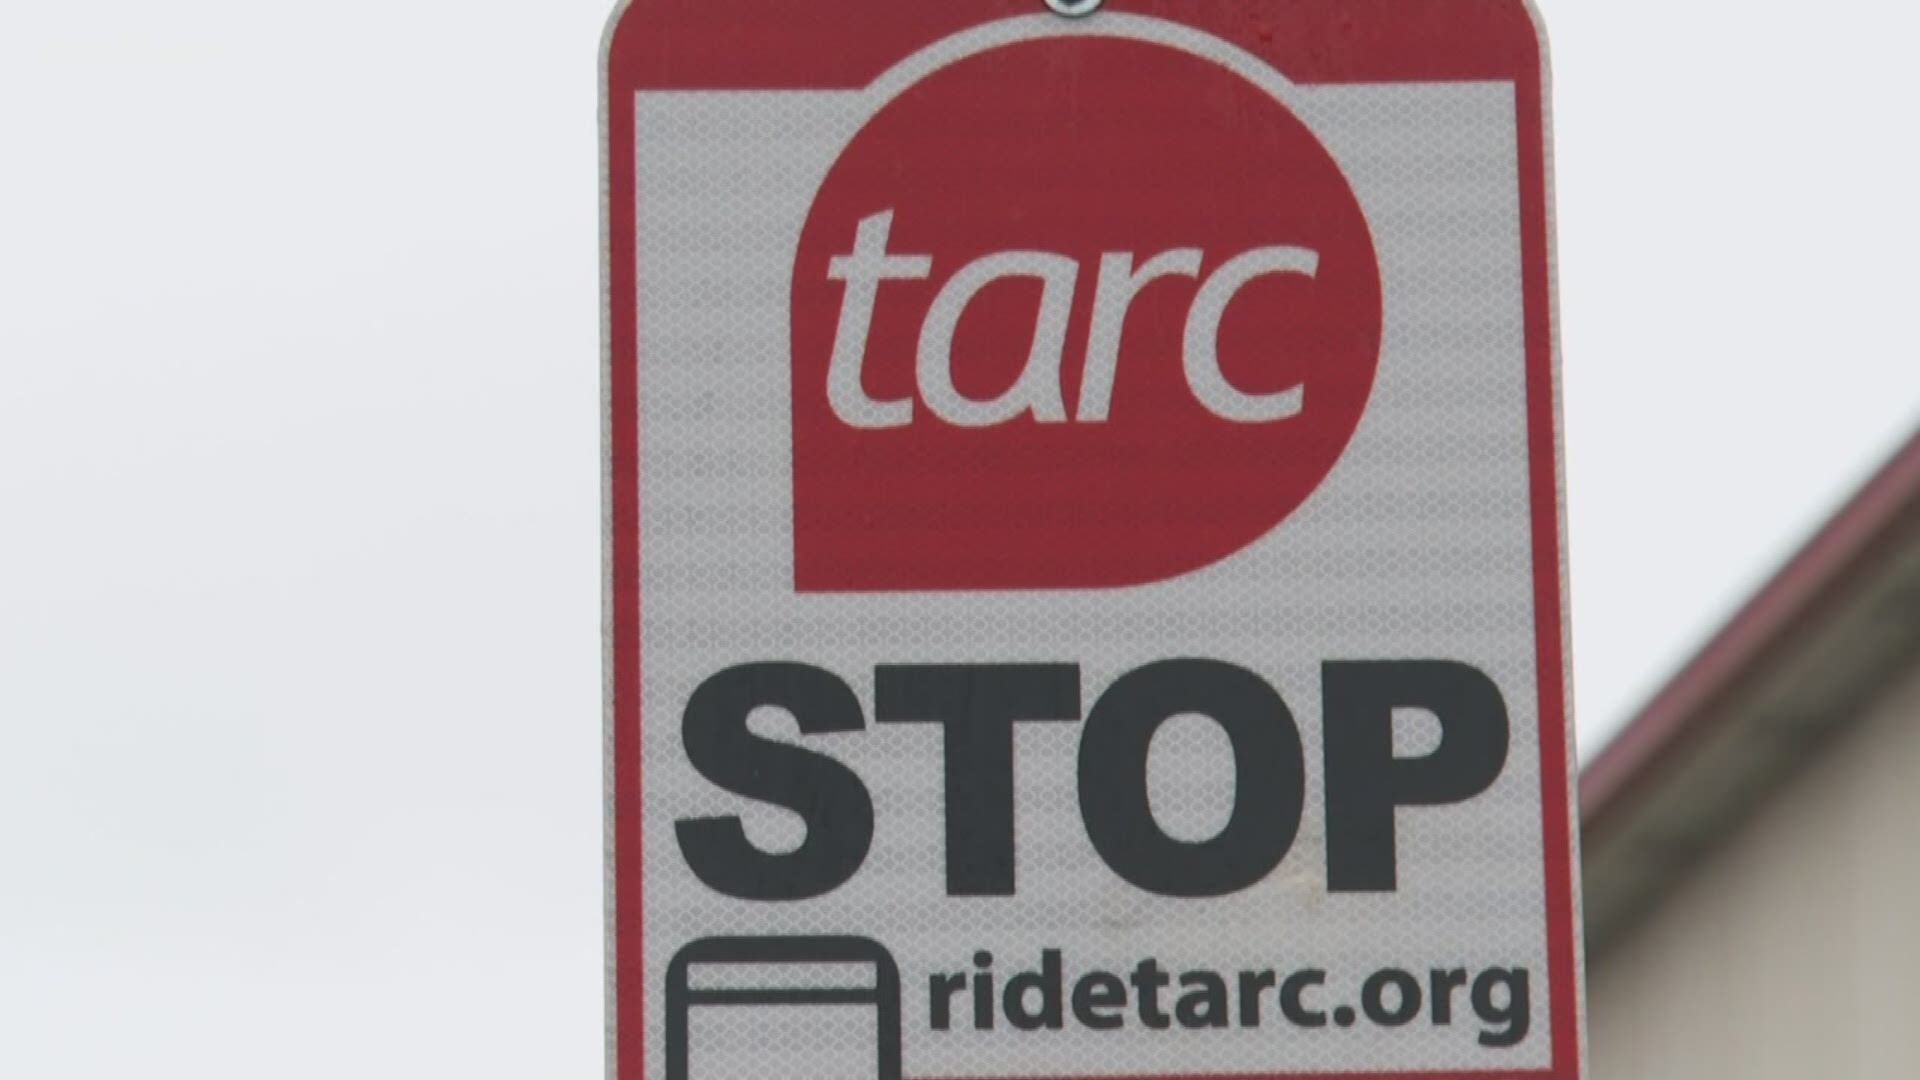 After TARC's former executive director stepped down amidst accusations of sexual misconduct Mayor Greg Fischer and TARC's leadership are taking action.